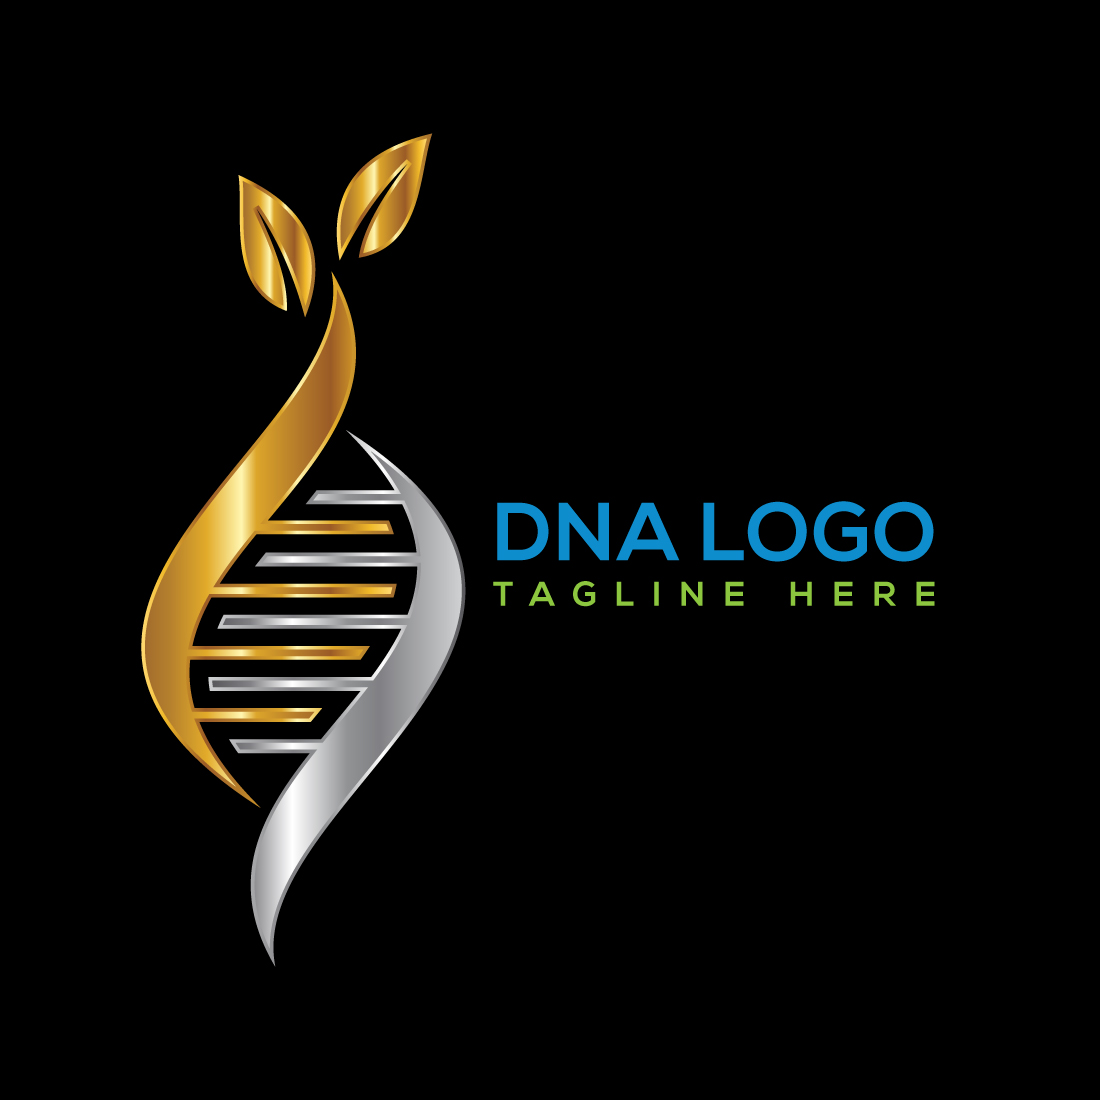 An image of a gorgeous logo in the form of DNA on a black background.